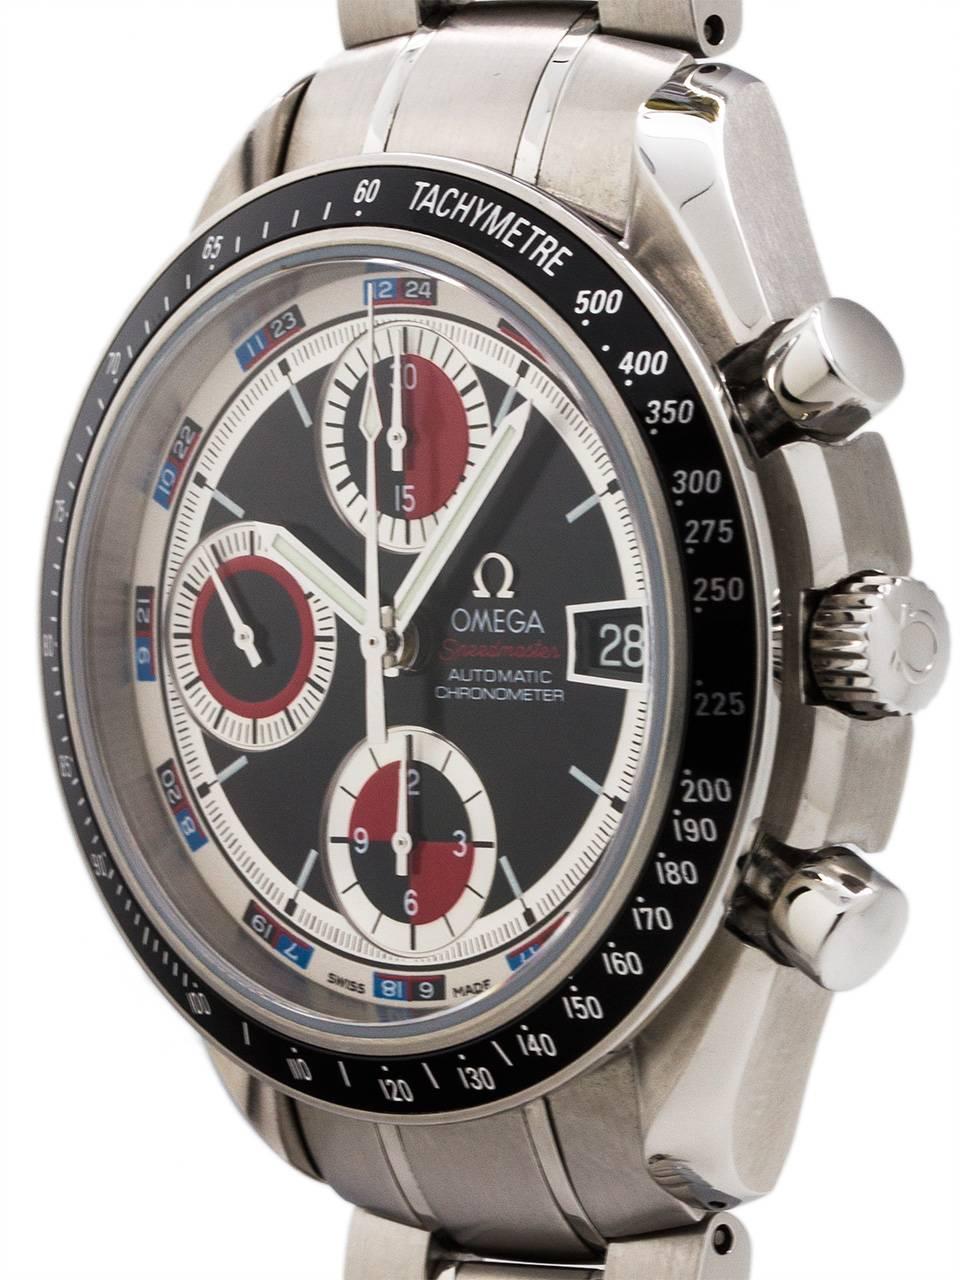 
Omega Stainless Steel Speedmaster Chronograph ref 32105200 case serial number 81.6 million circa 2005. 40mm diameter stainless steel case with black tachometer bezel. Sapphire crystal and signed Omega crown. Black dial with luminous indexes with 12